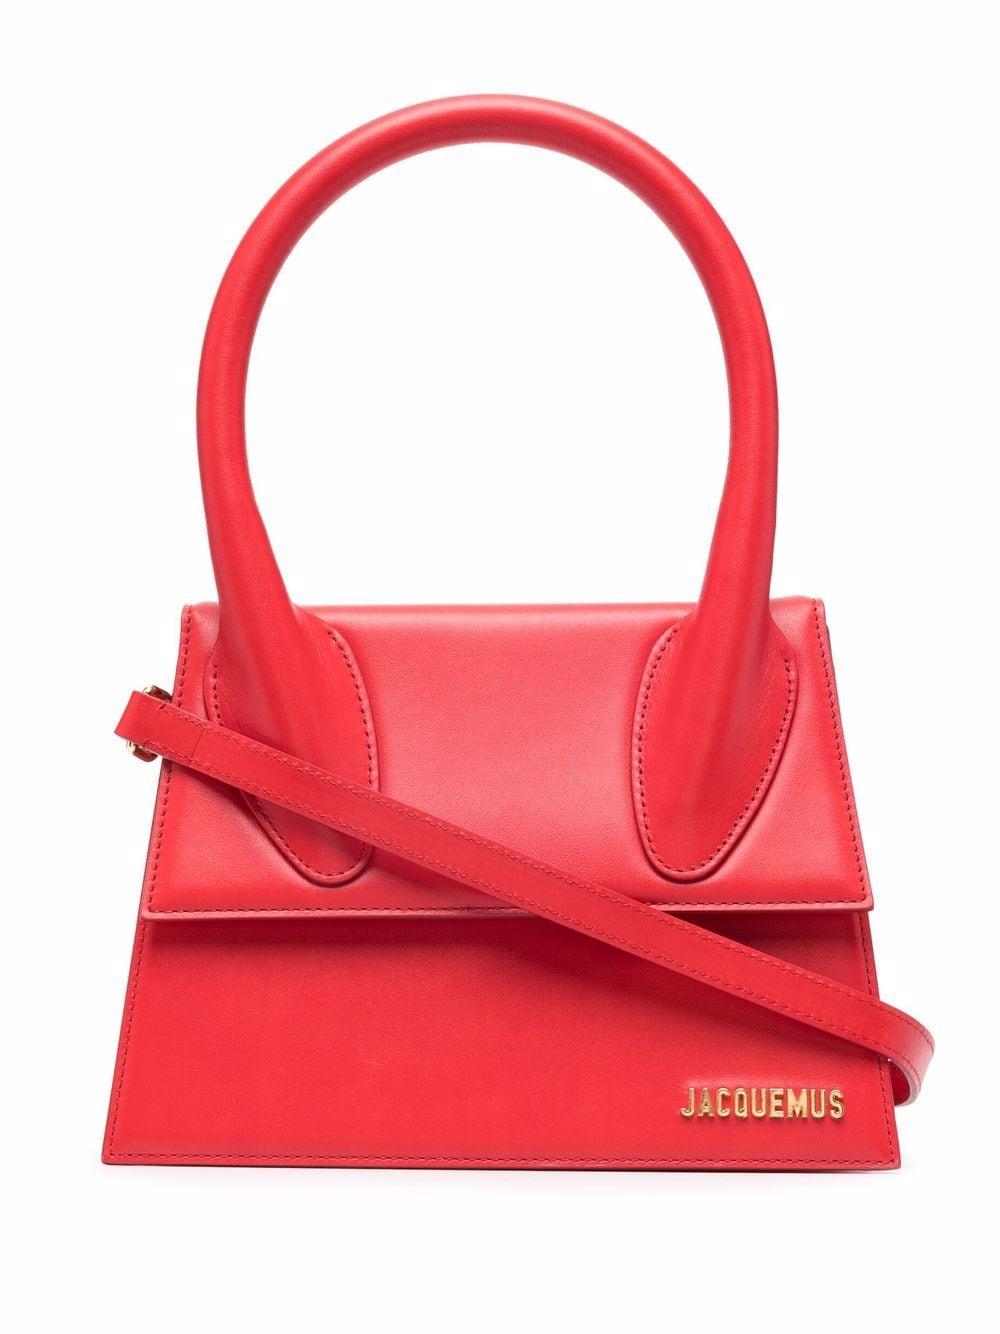 Jacquemus Le Grand Chiquito Tote Bag in Red | Lyst